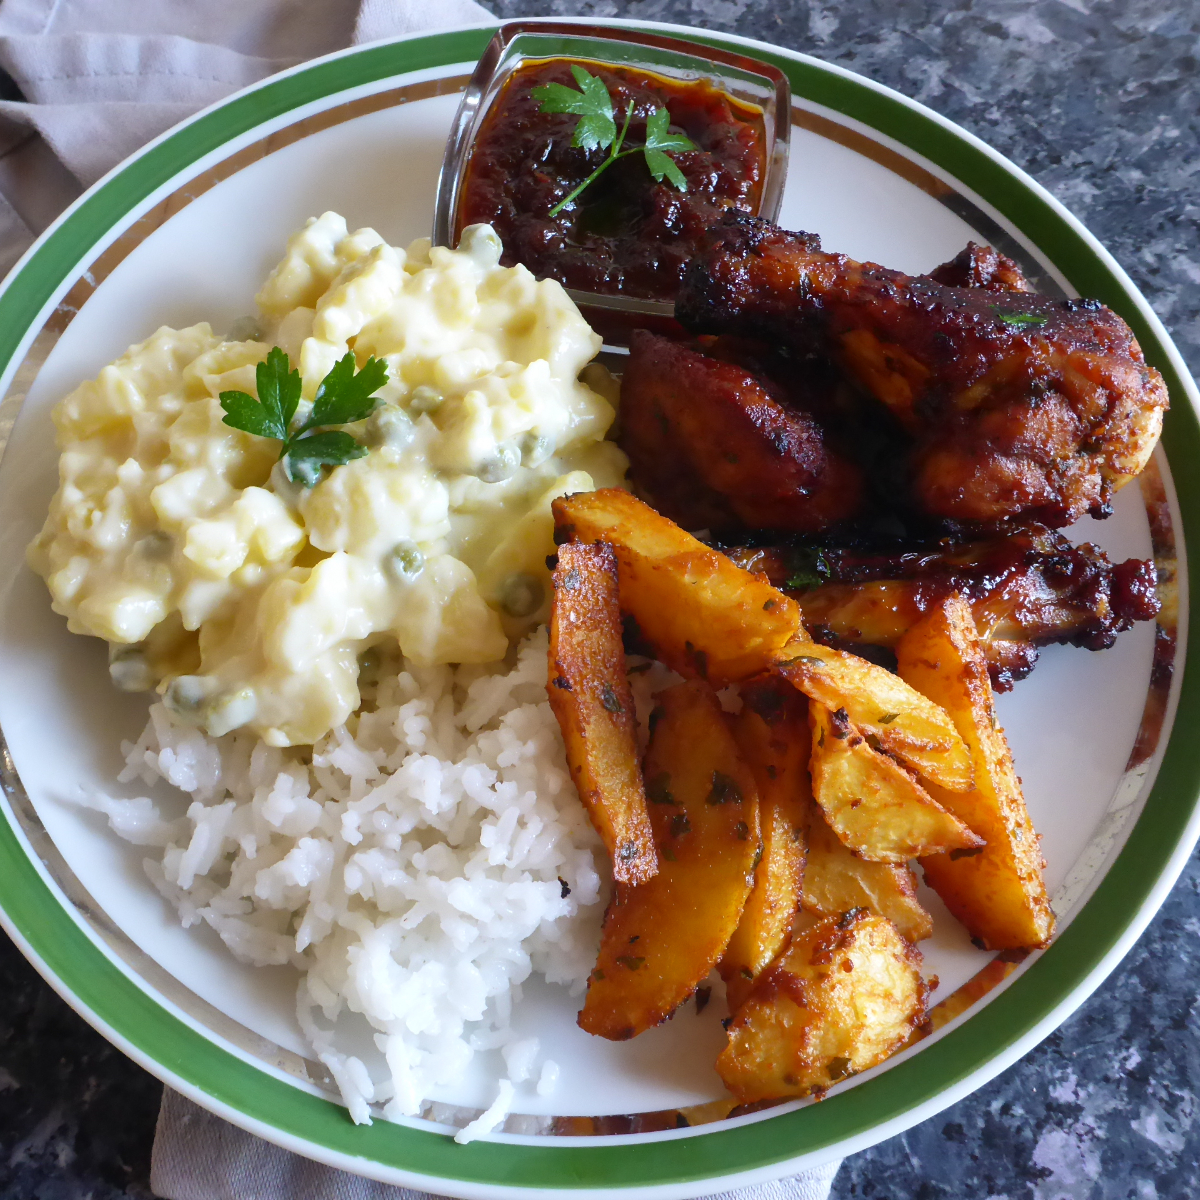 A well-balanced plate featuring a succulent roasted chicken, crispy roasted potatoes, fluffy white rice, creamy Namibian potato salad, and a small bowl of flavorful dipping sauce.